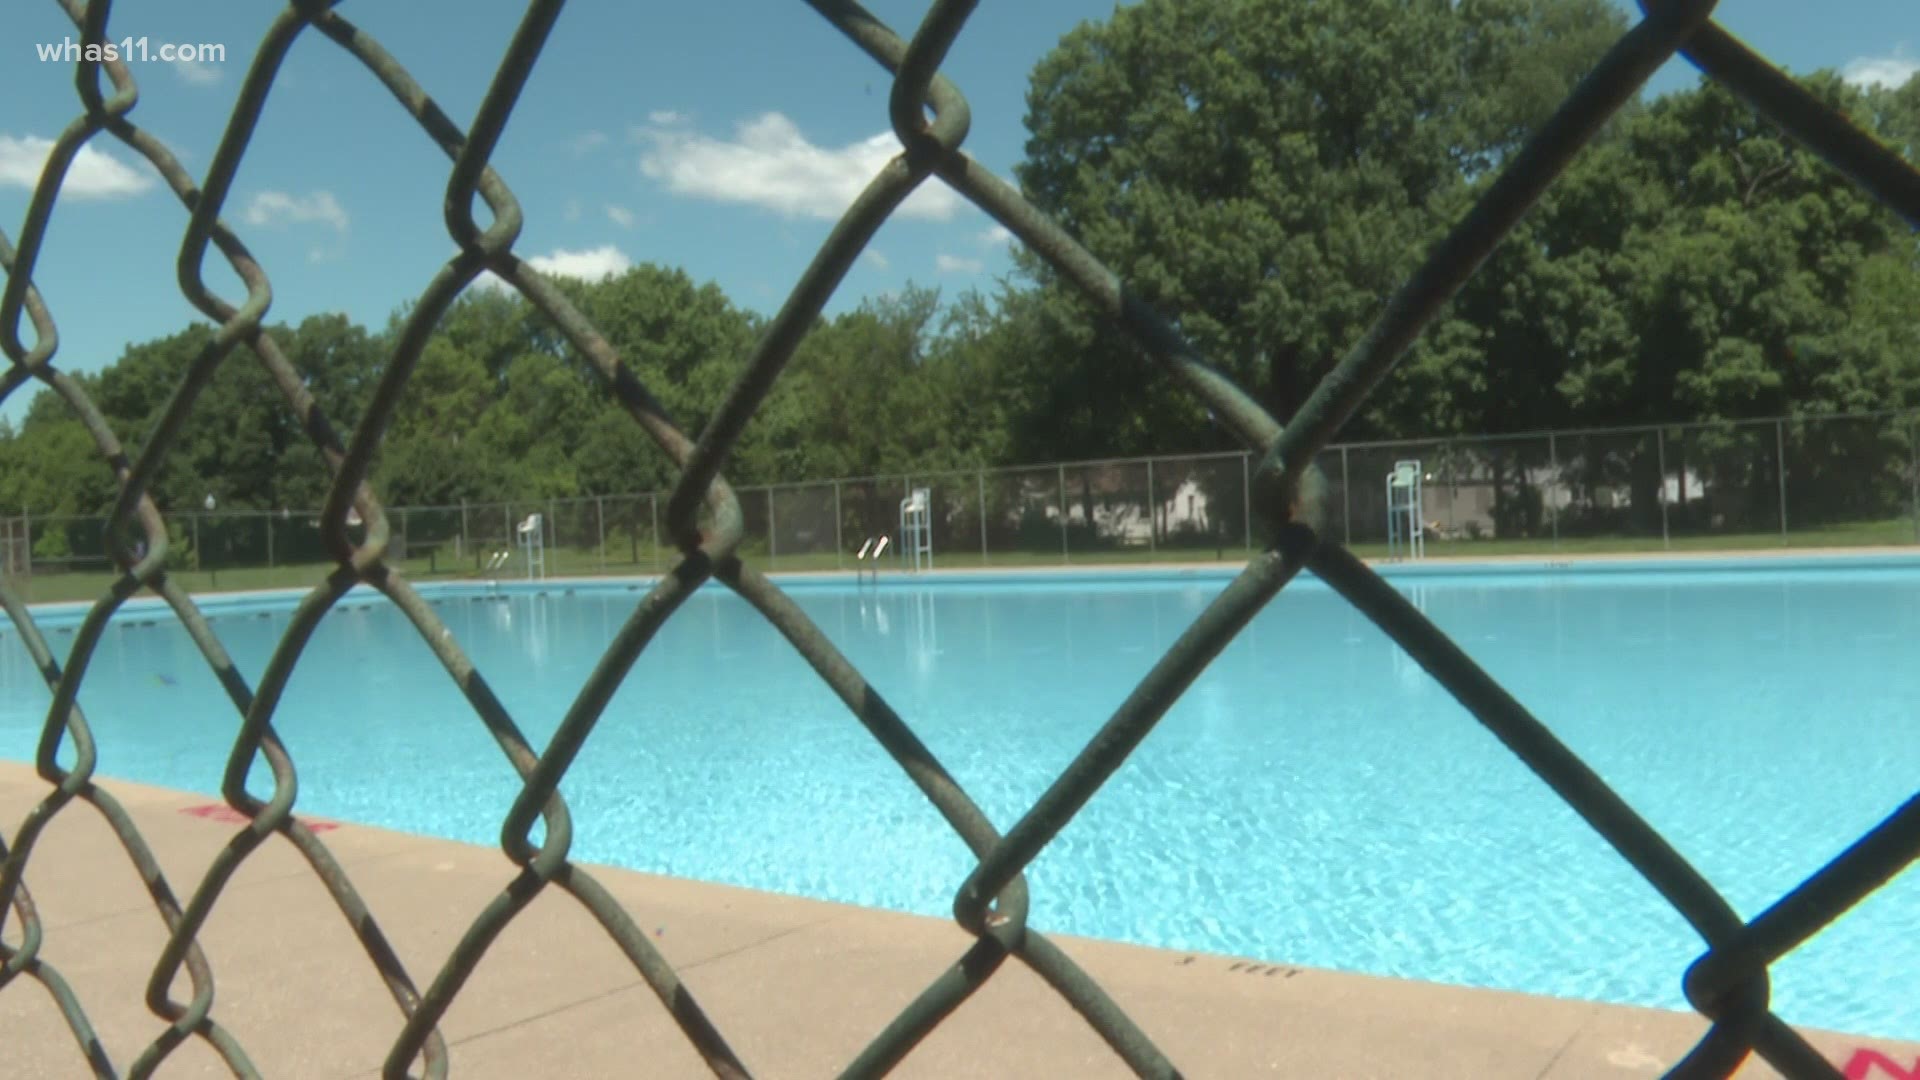 Louisville Metro Parks & Rec said they're trying to get more lifeguards to keep the pool open for the summer.